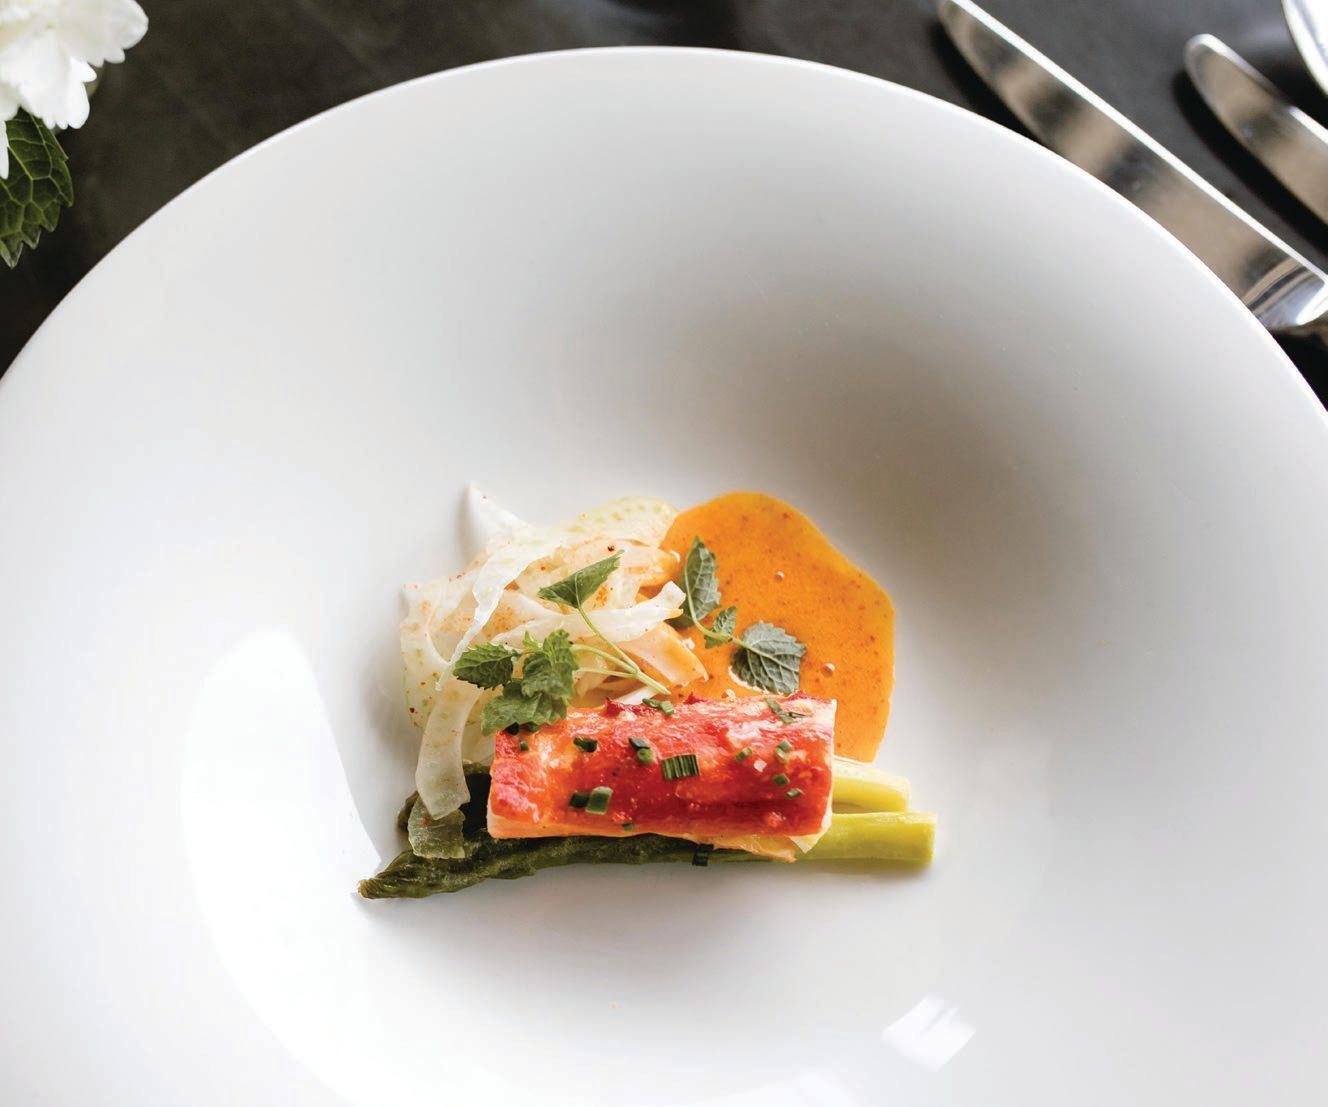 Alaskan King Crab is one of the many savory dishes on the menu. AT THE TABLE PHOTO BY LEXY PIERCE 